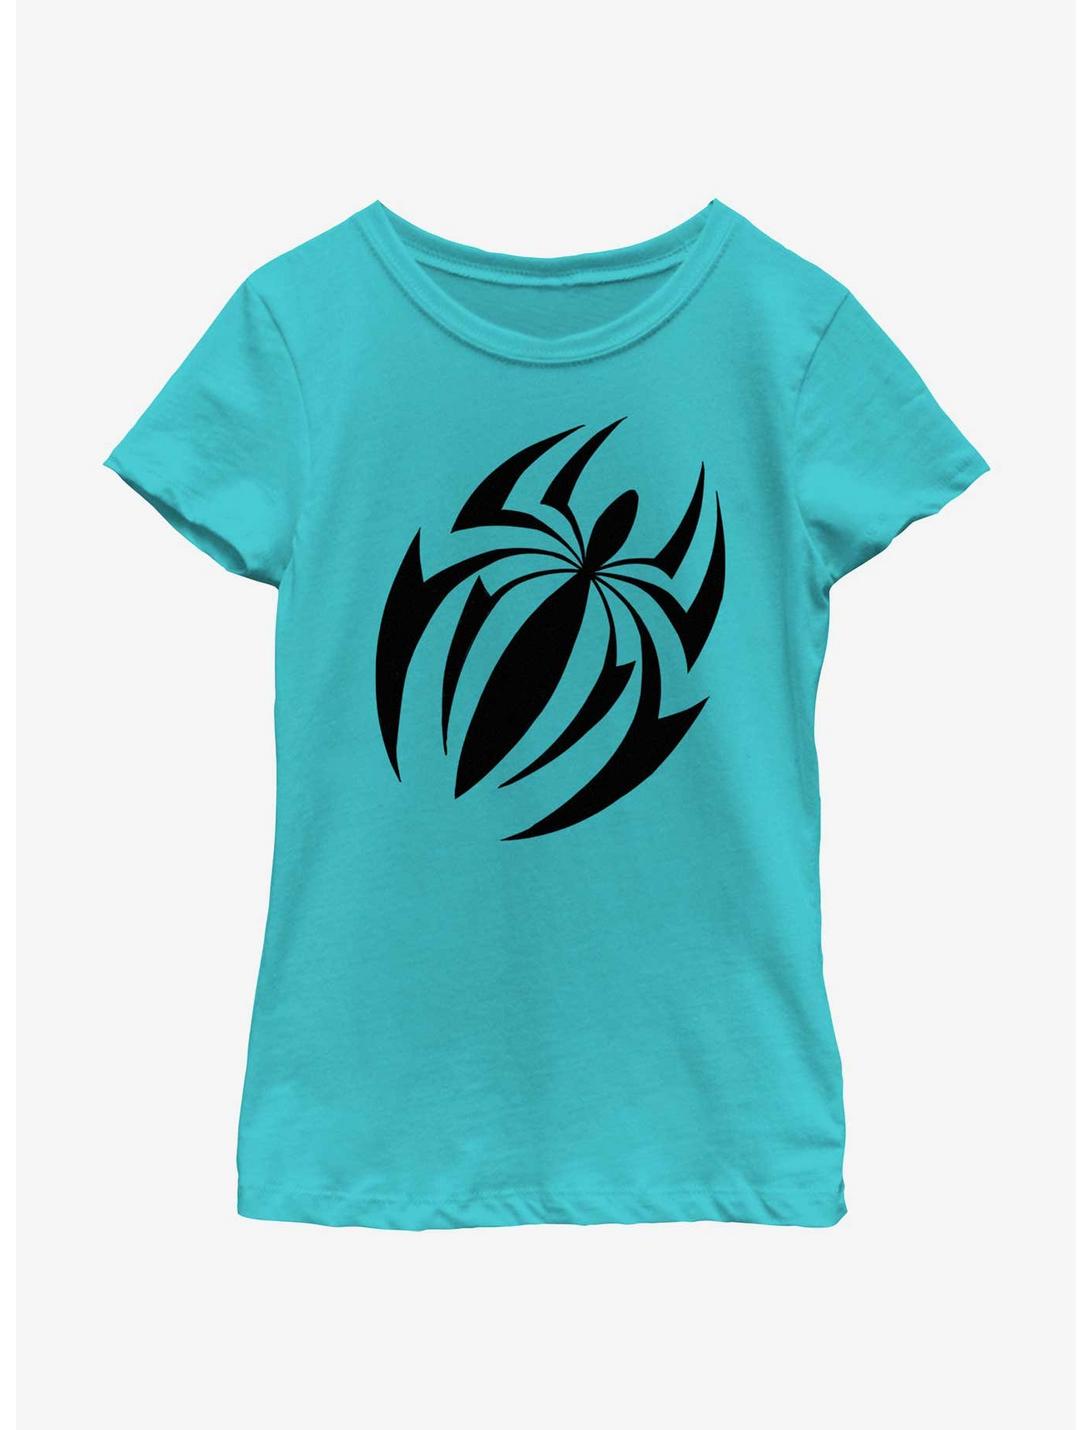 Marvel Spider-Man: Across The Spiderverse Scarlet Spider Icon Youth Girls T-Shirt, TAHI BLUE, hi-res